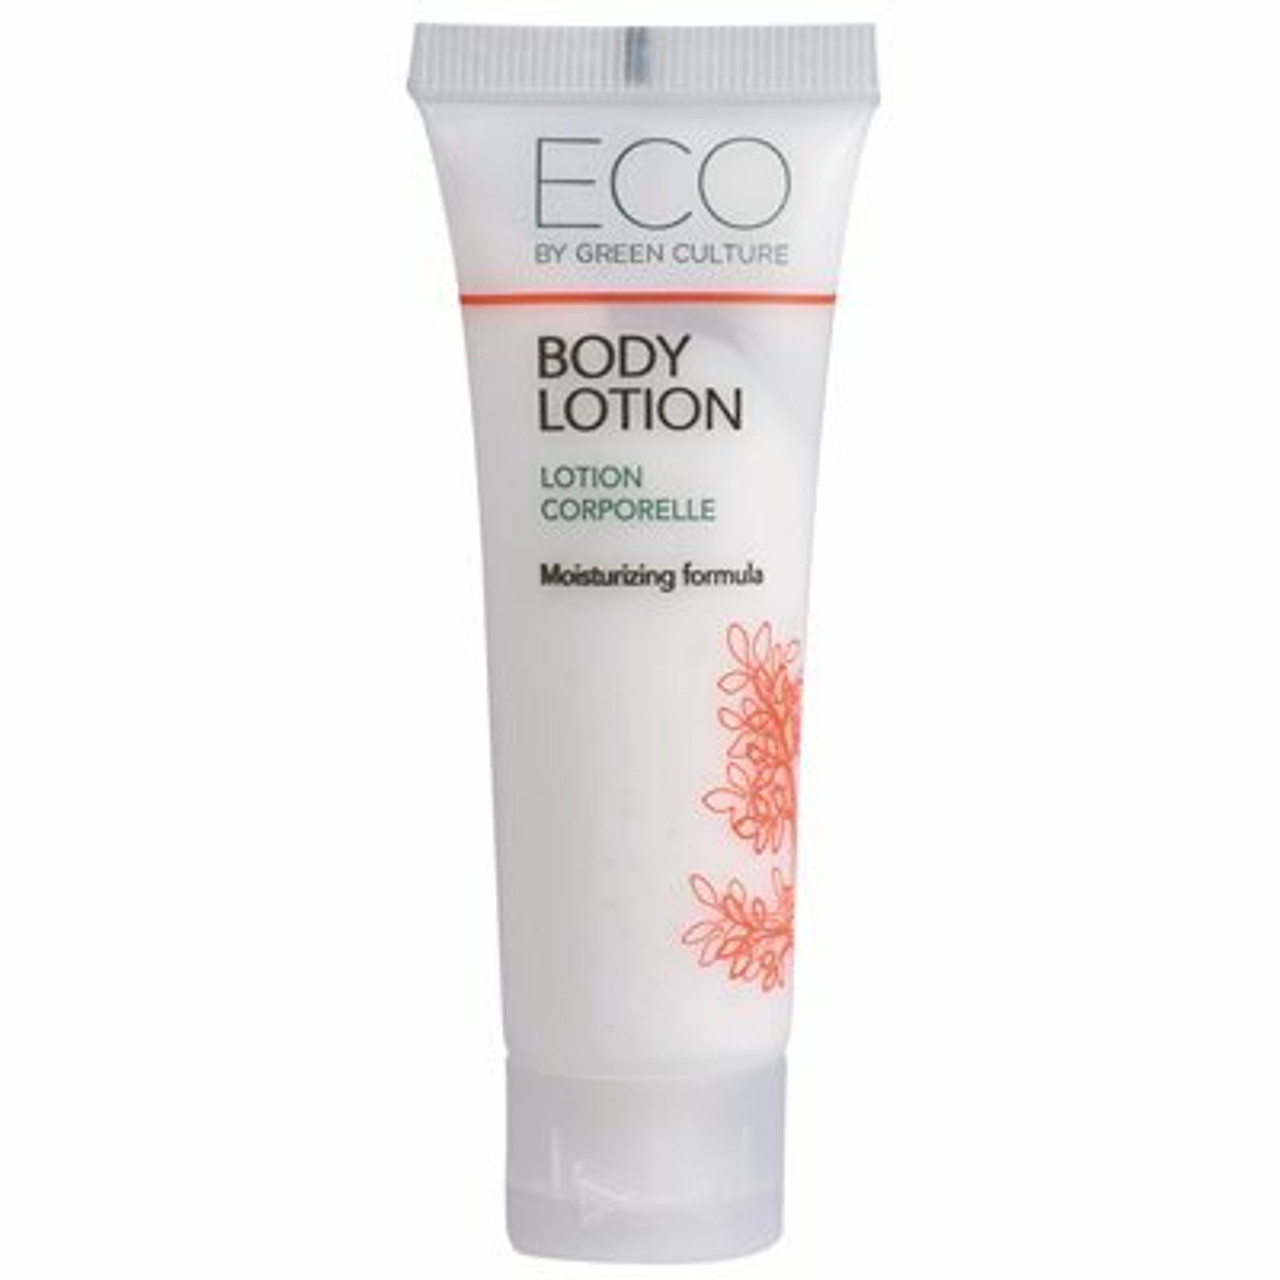 1 Oz. Tube Eco By Green Culture Body Lotion (288 Tubes Per Case)